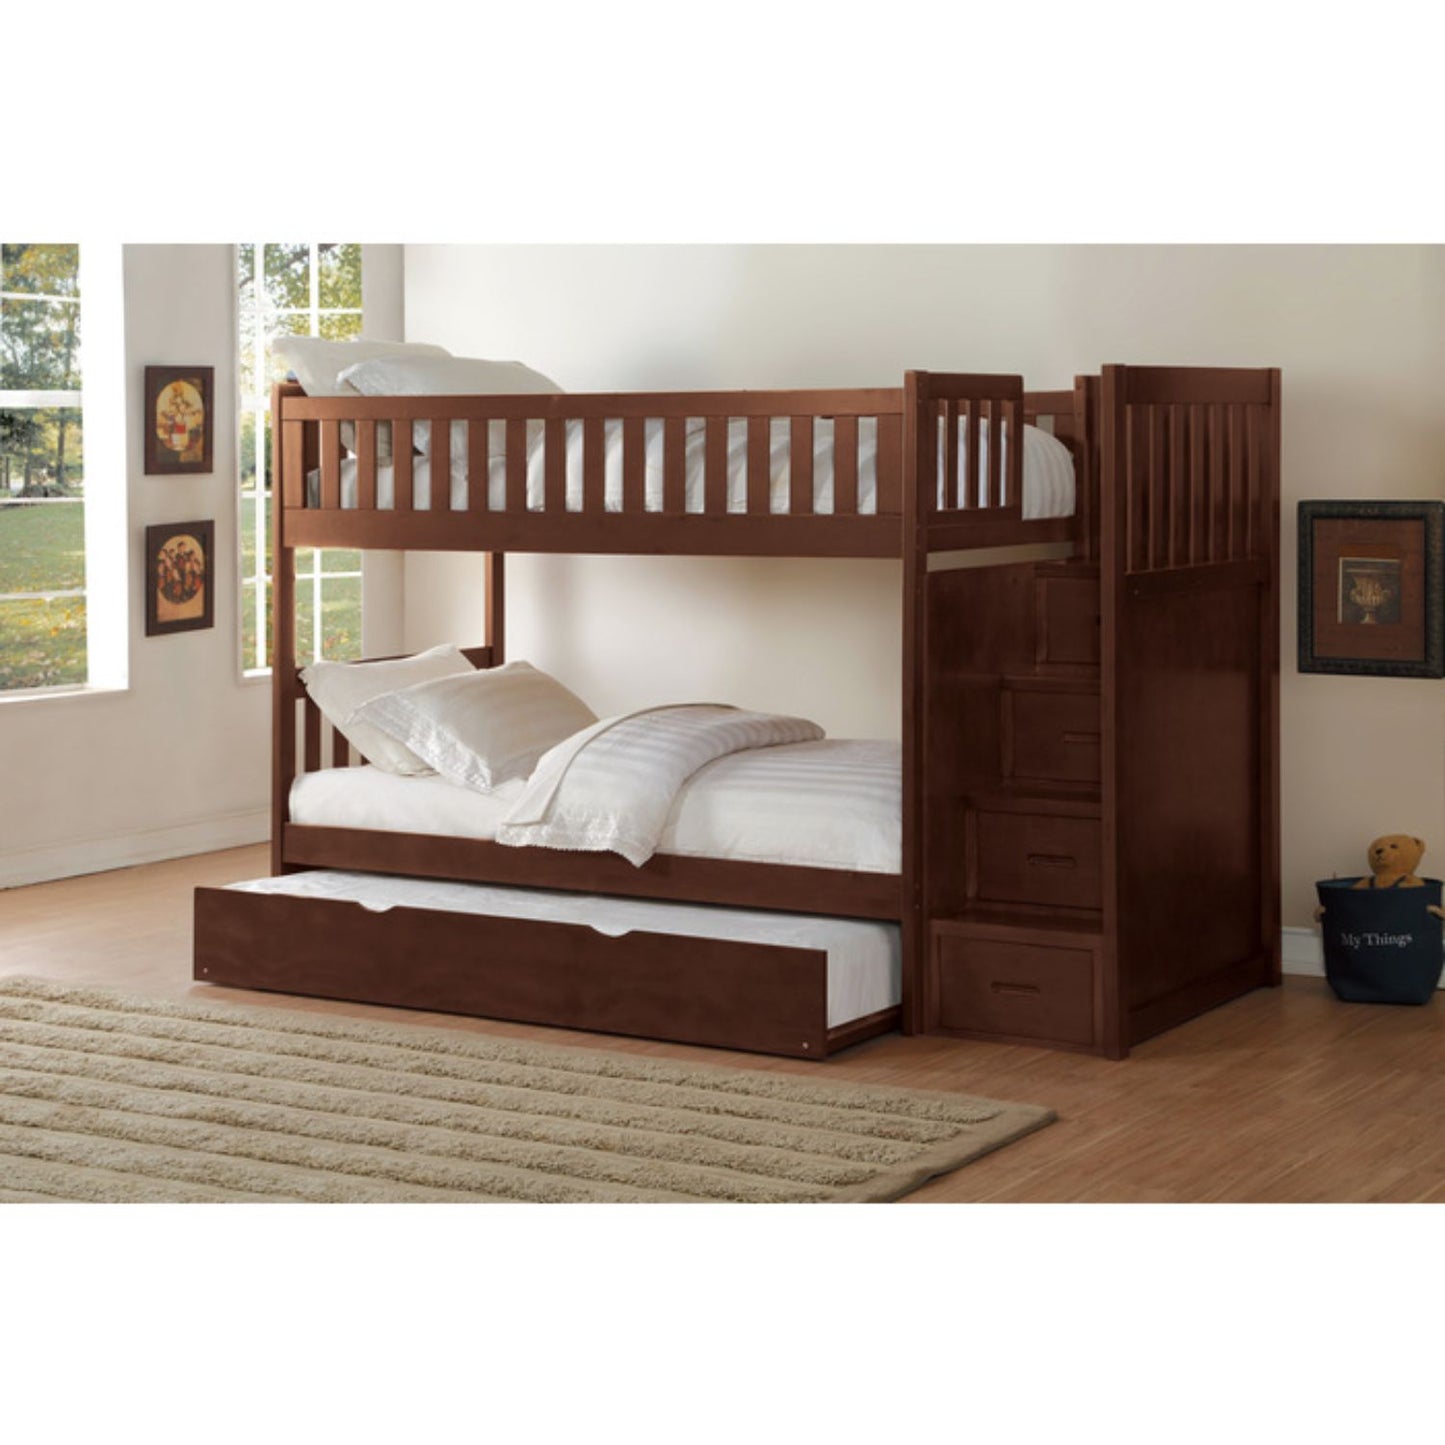 Homelegance Rowe Bunk Bed with Reversible Step Storage Twin Trundle in Dark Cherry